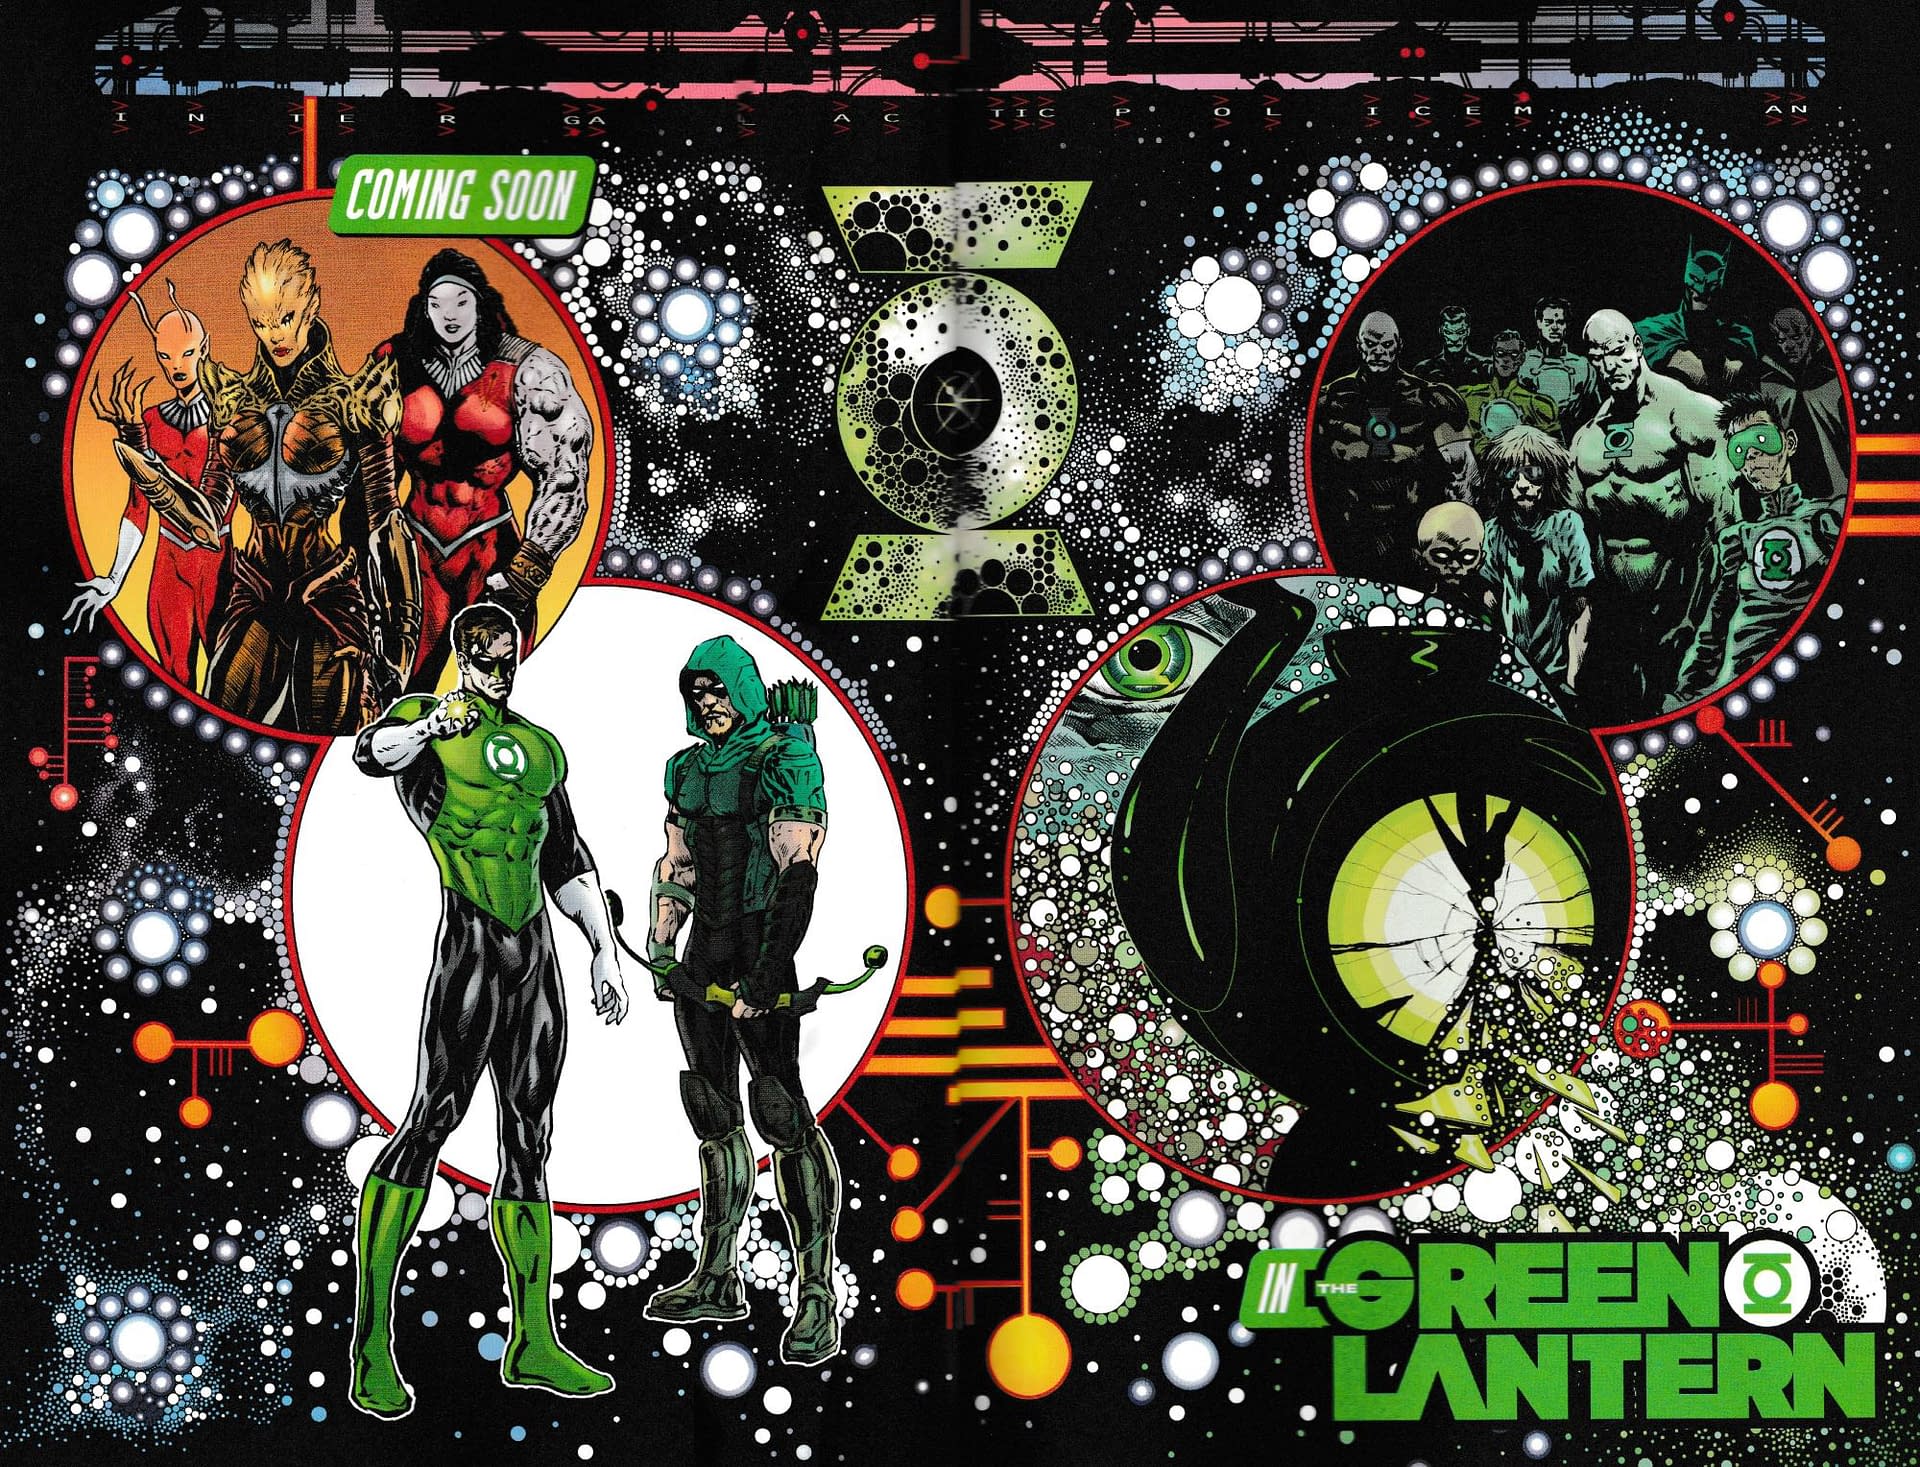 What's Next For Grant Morrison and Liam Sharp's The Green Lantern?